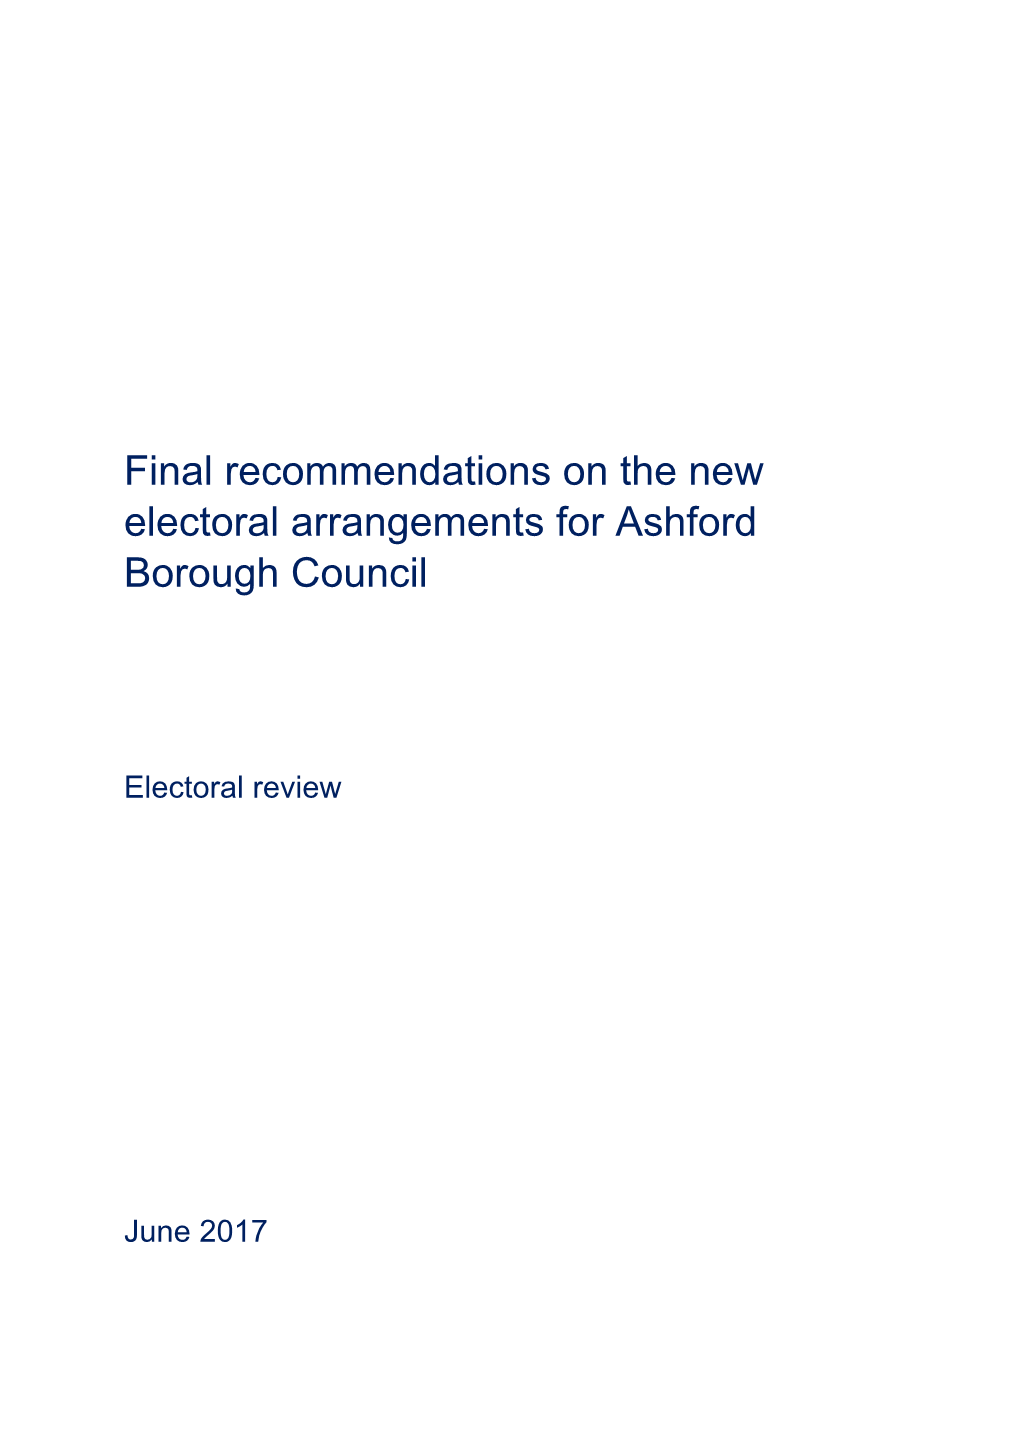 Final Recommendations on the New Electoral Arrangements for Ashford Borough Council